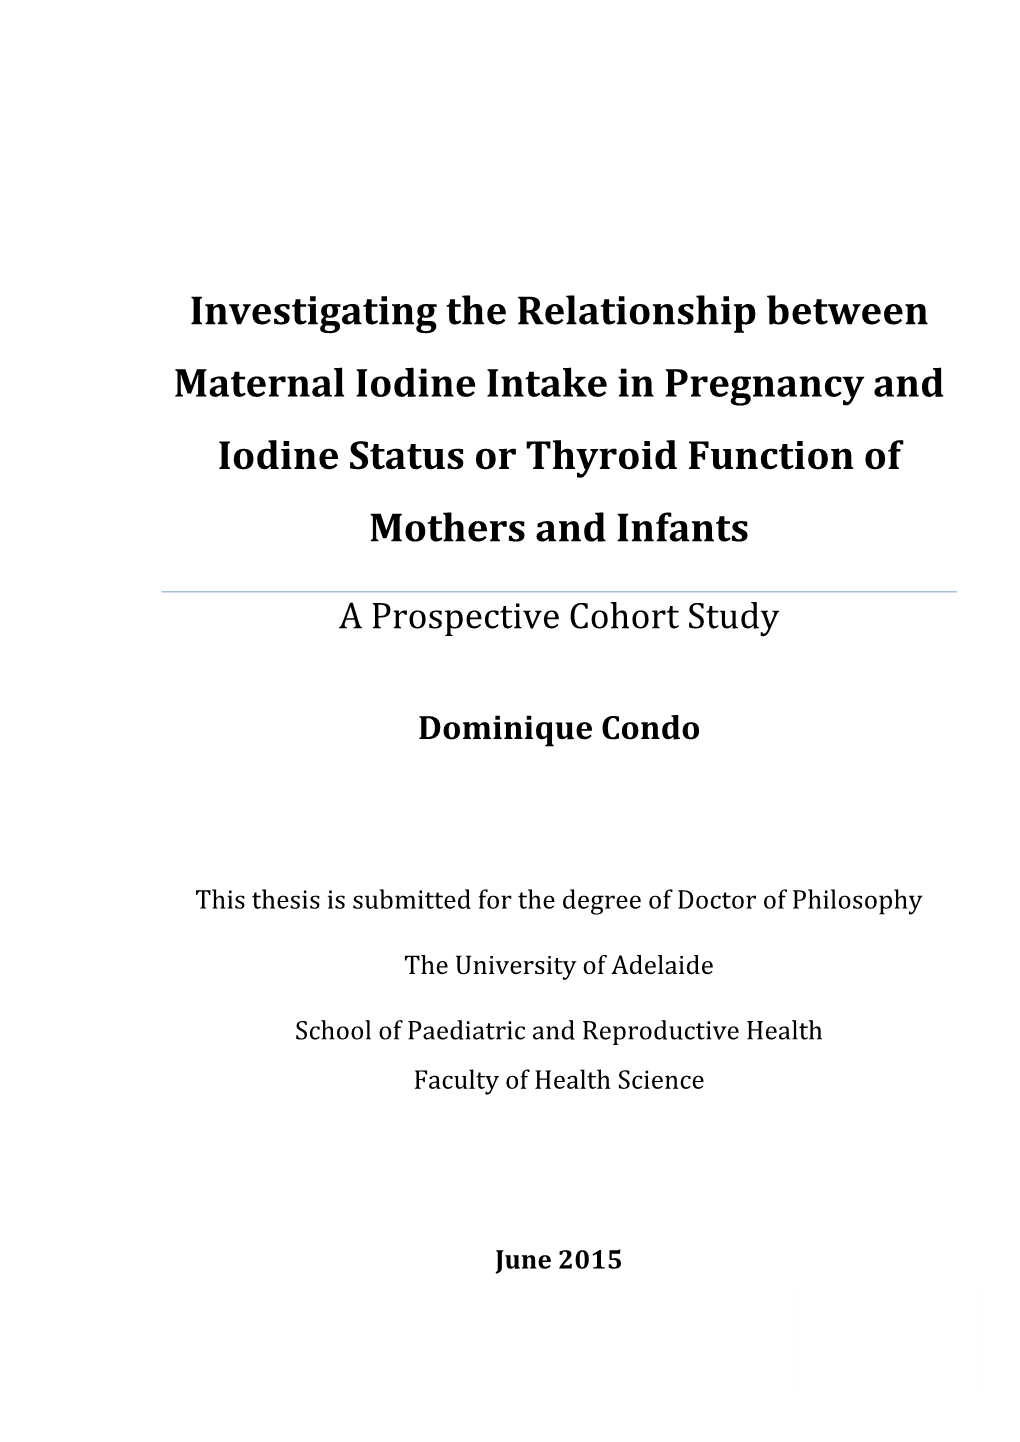 Investigating the Relationship Between Maternal Iodine Intake in Pregnancy and Iodine Status Or Thyroid Function of Mothers and Infants